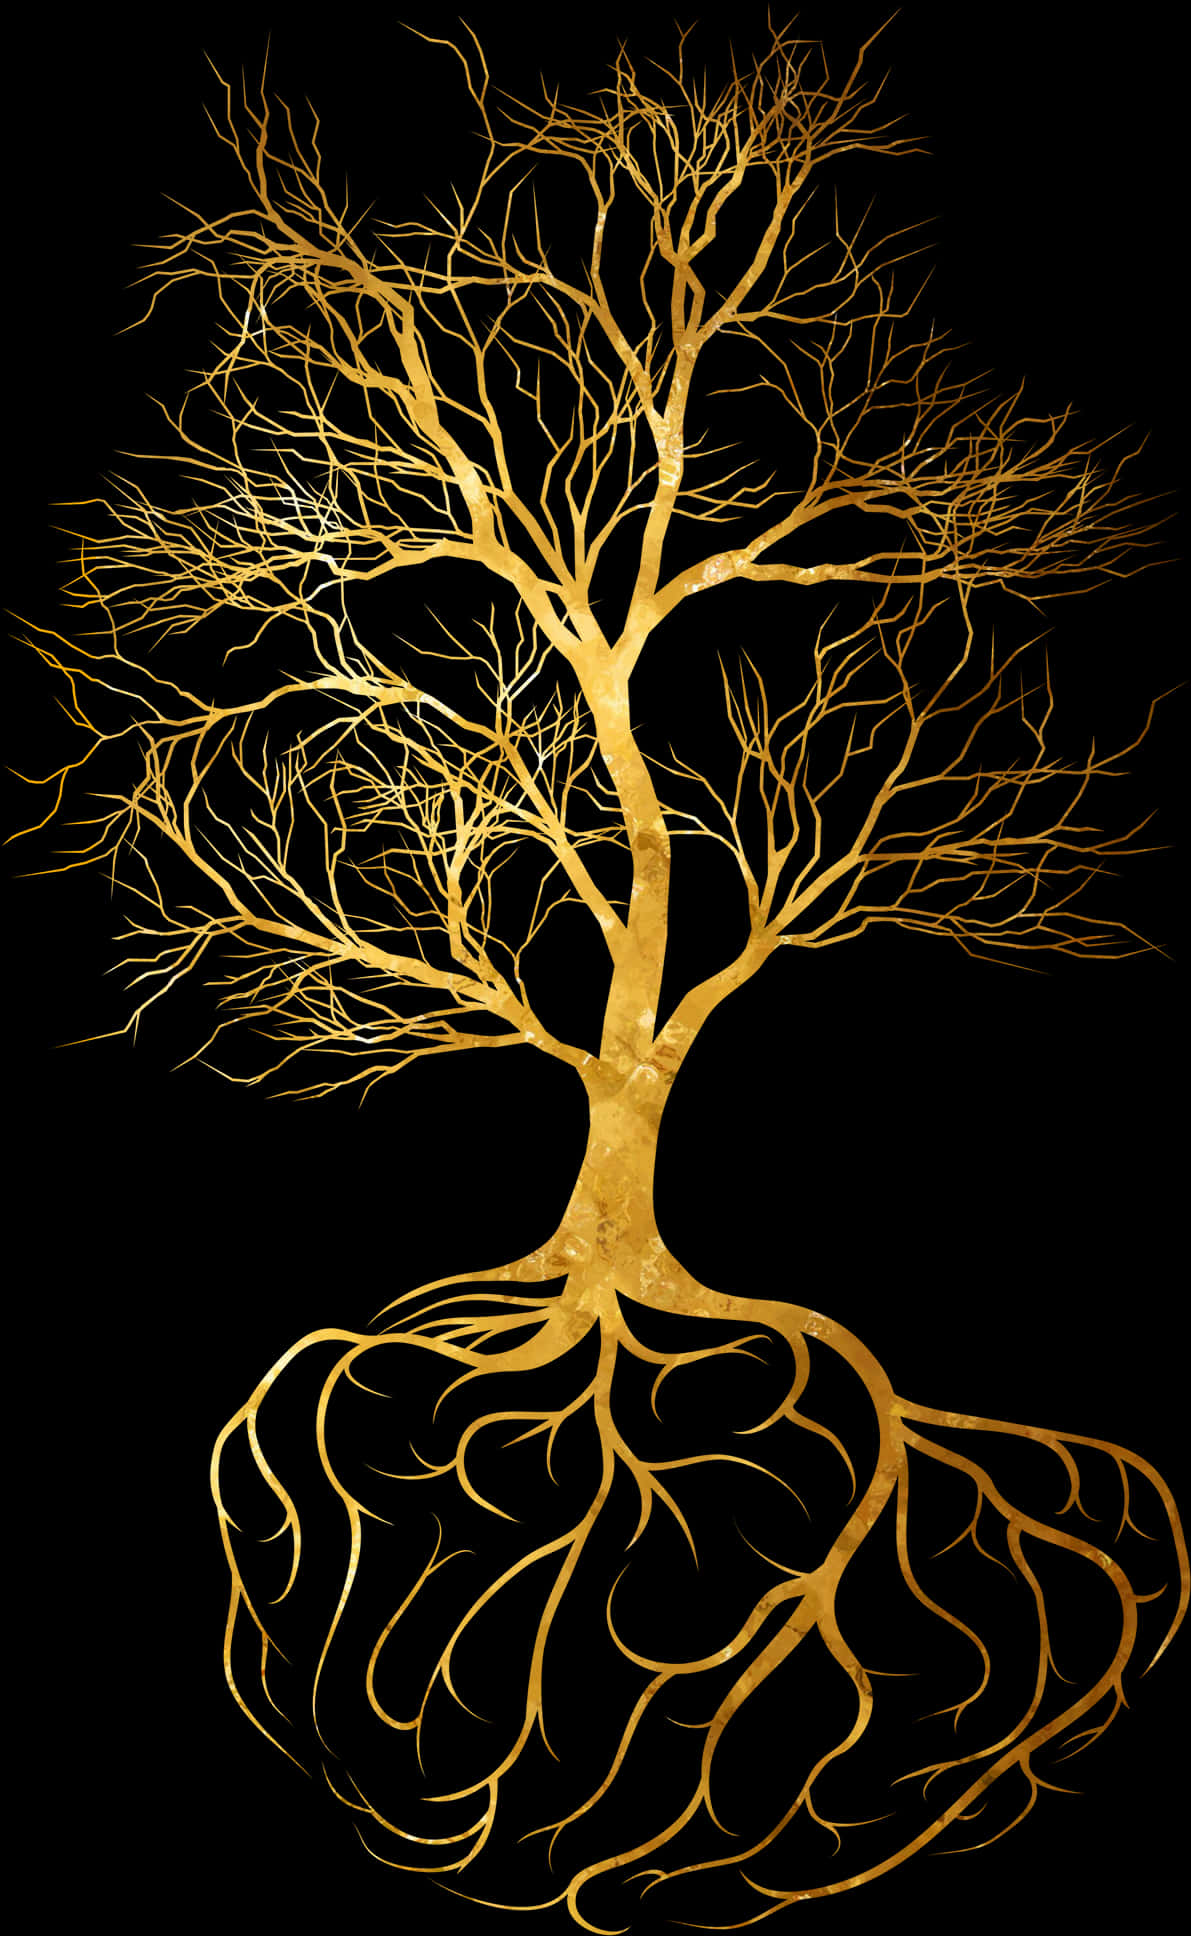 Golden Treewith Roots Illustration